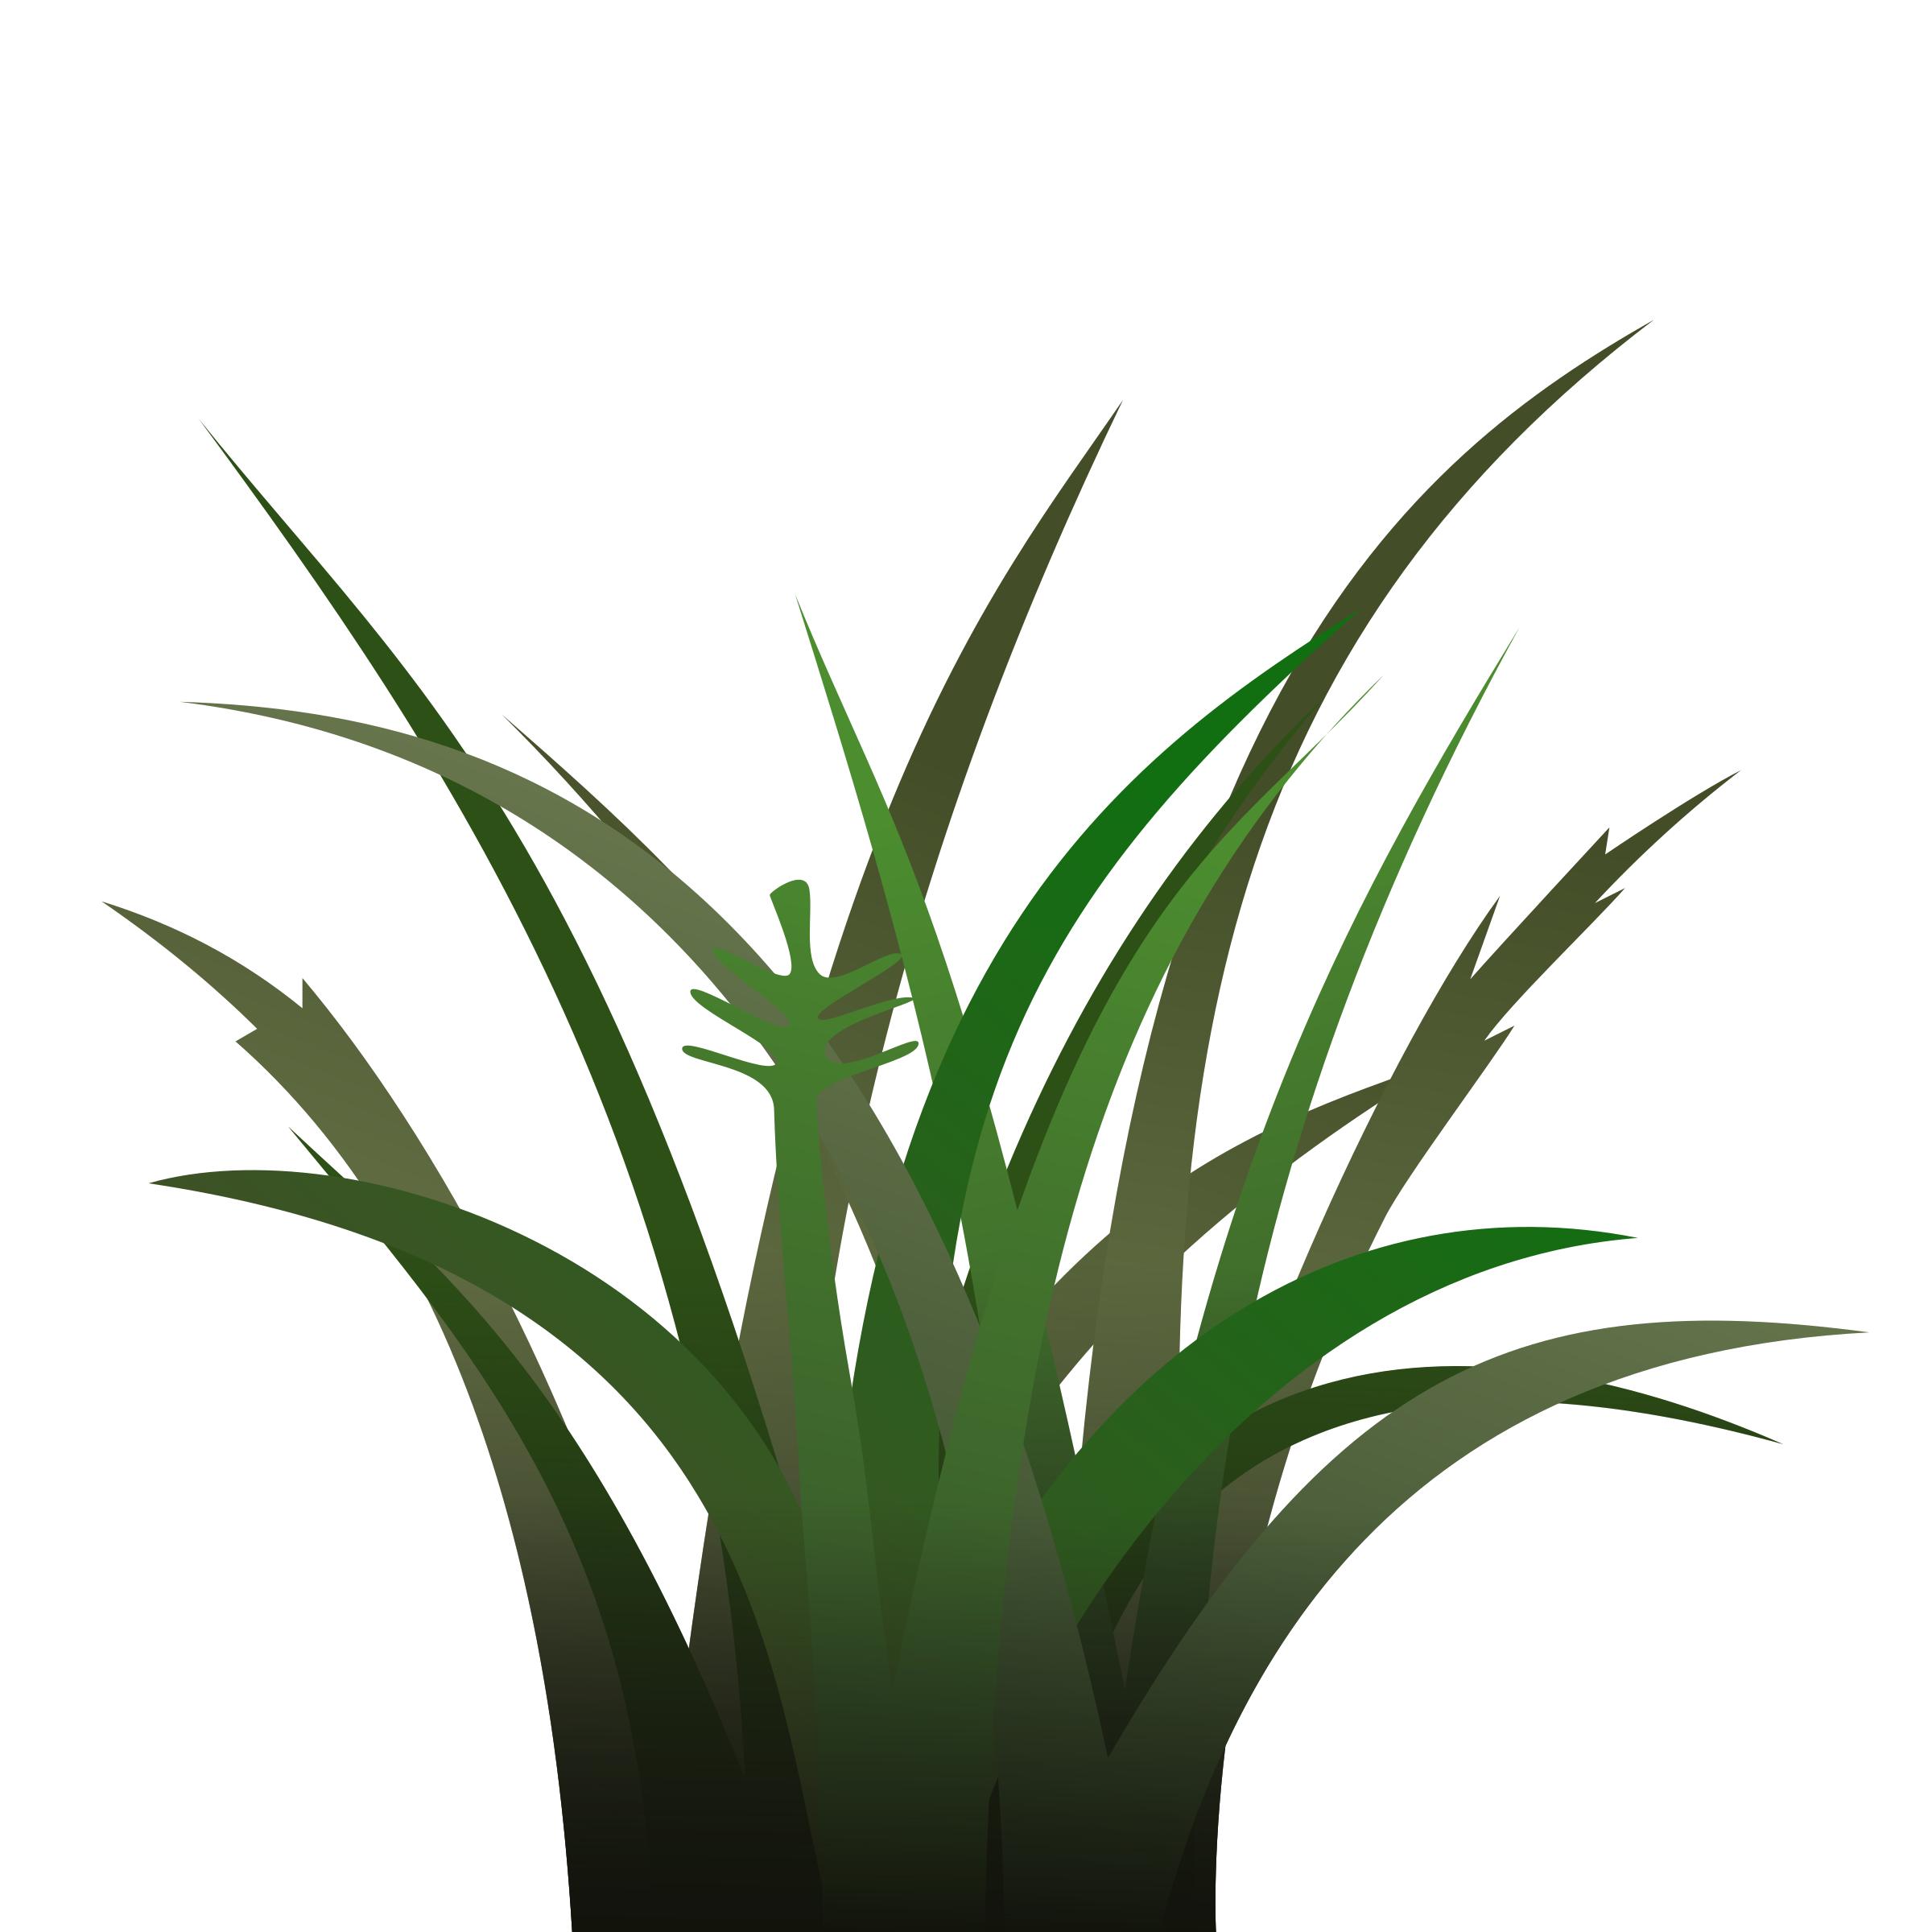 Dark Grass Shaded png